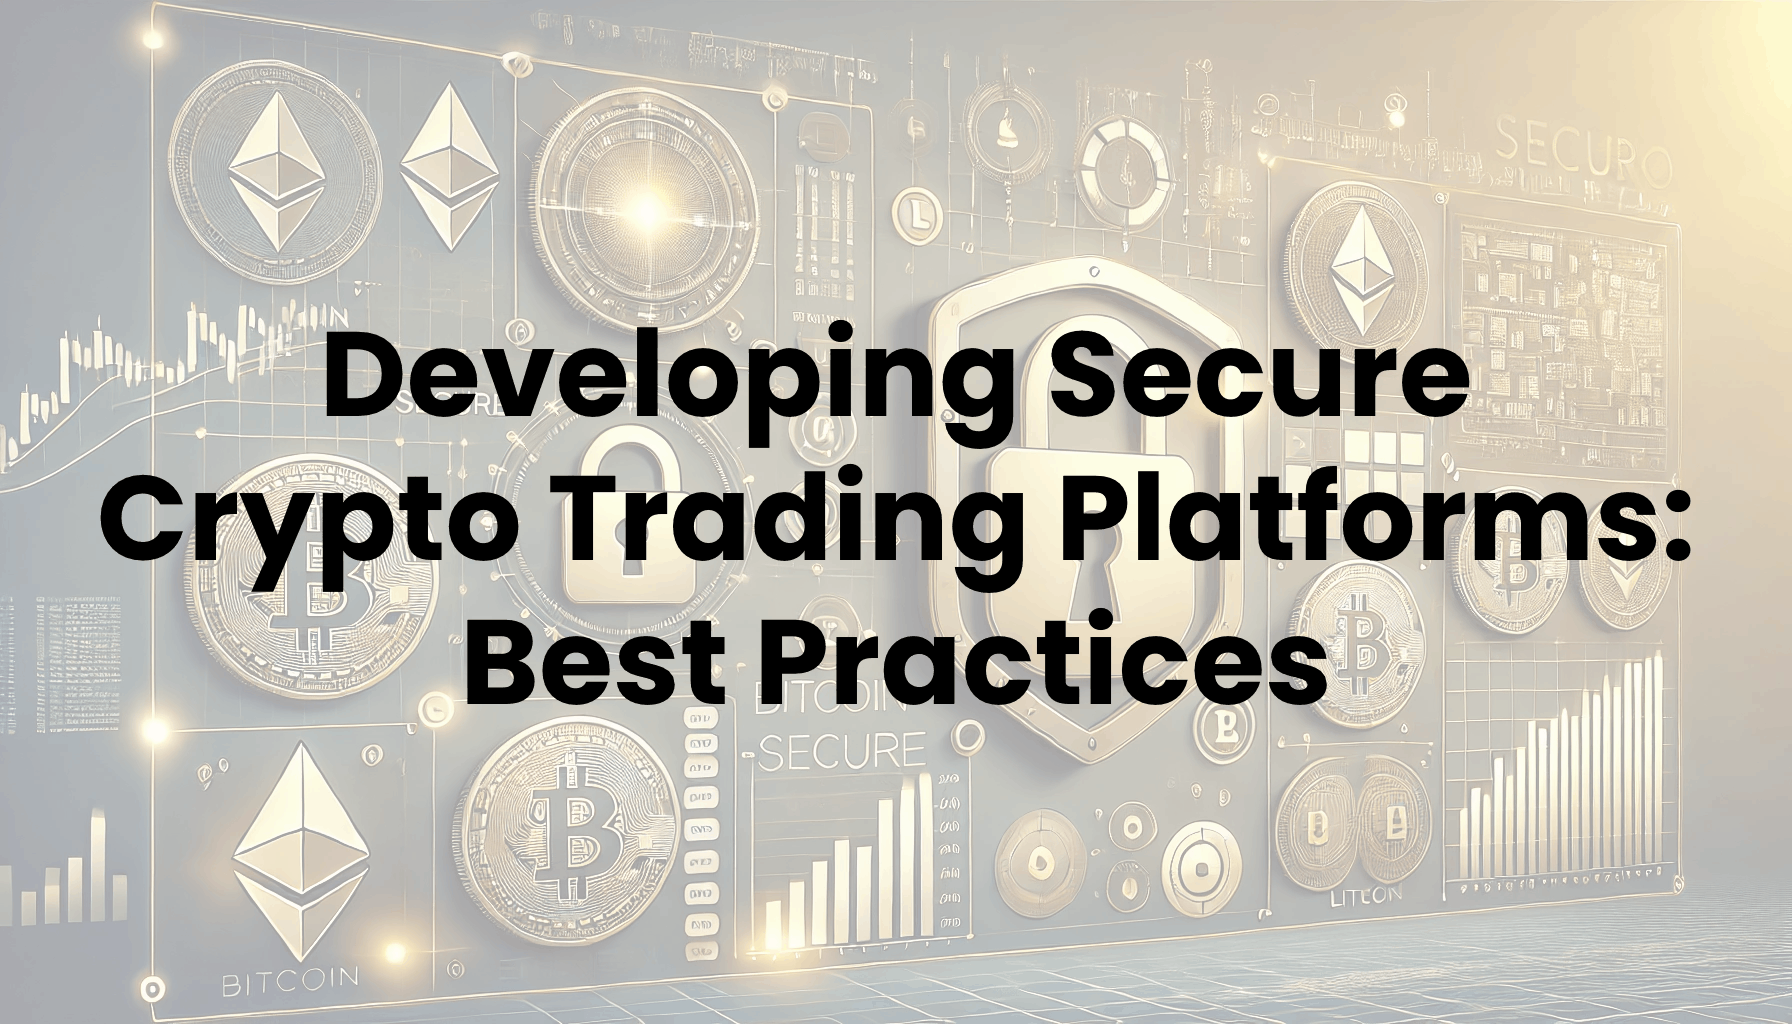 Developing Secure Crypto Trading Platforms: Best Practices